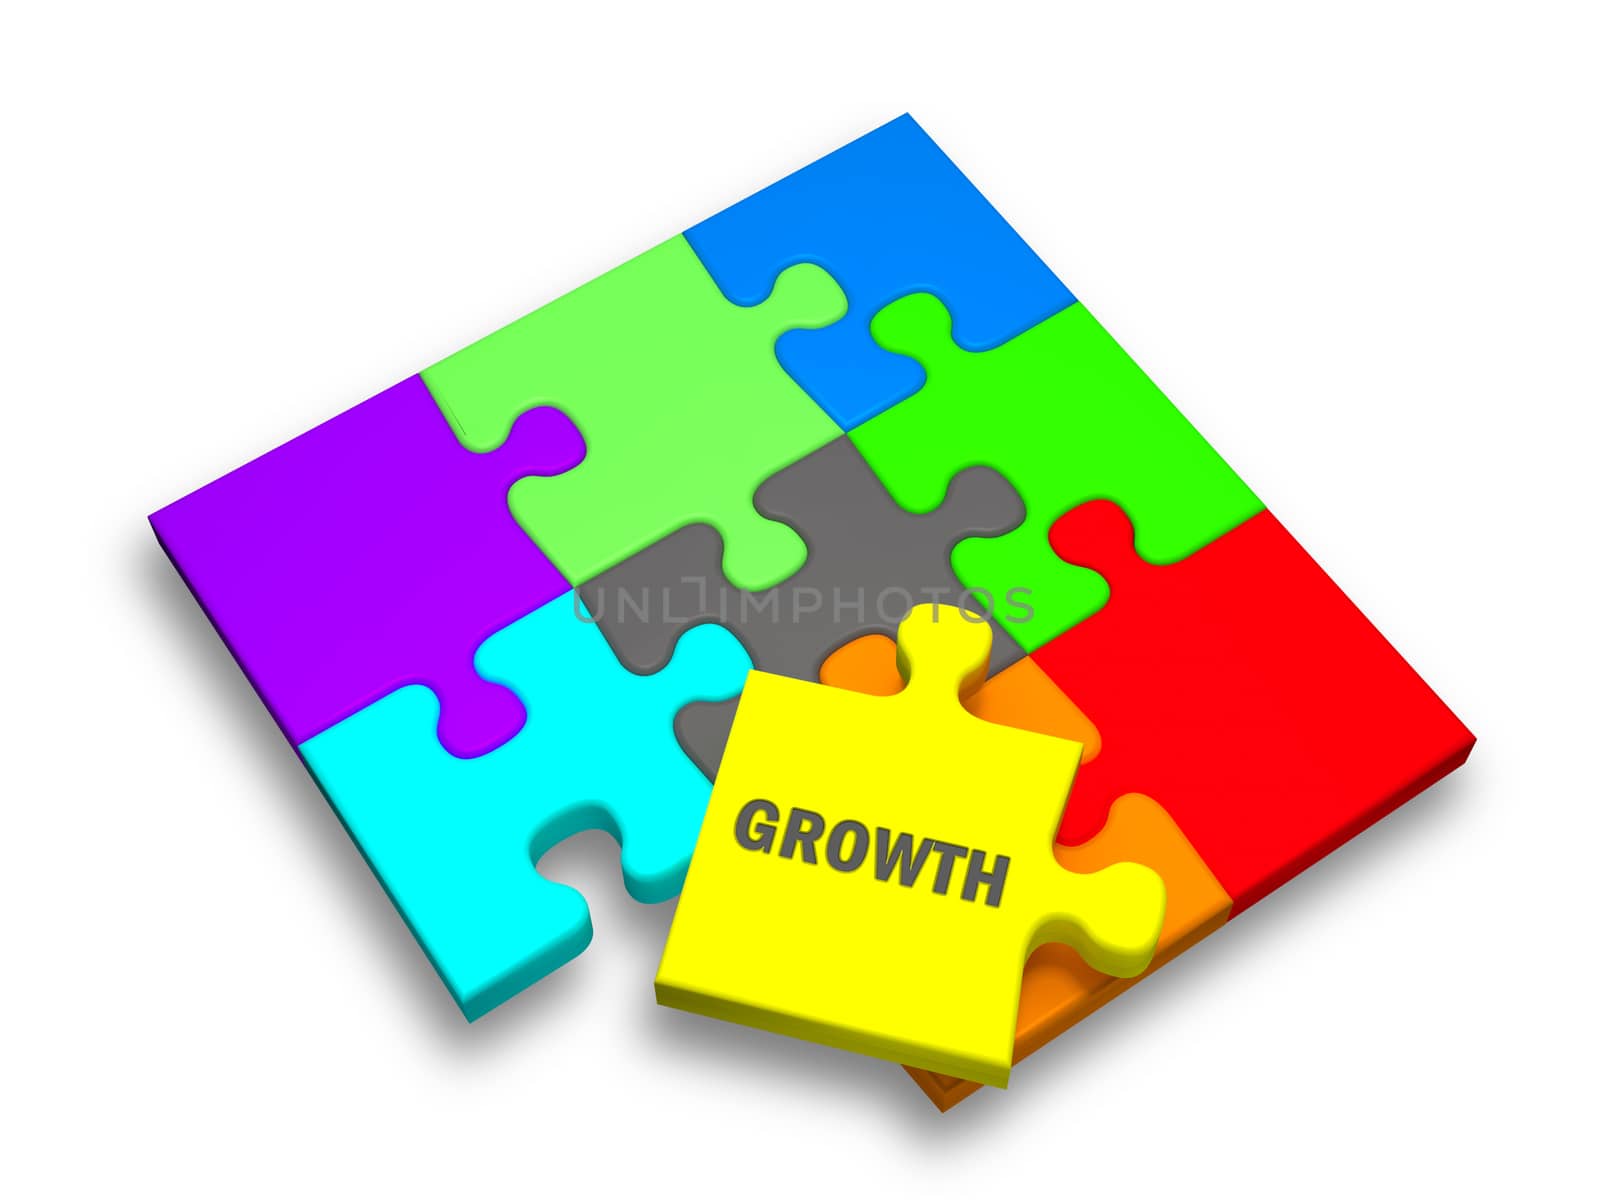 9 puzzle pieces one taken apart with the text "Growth".